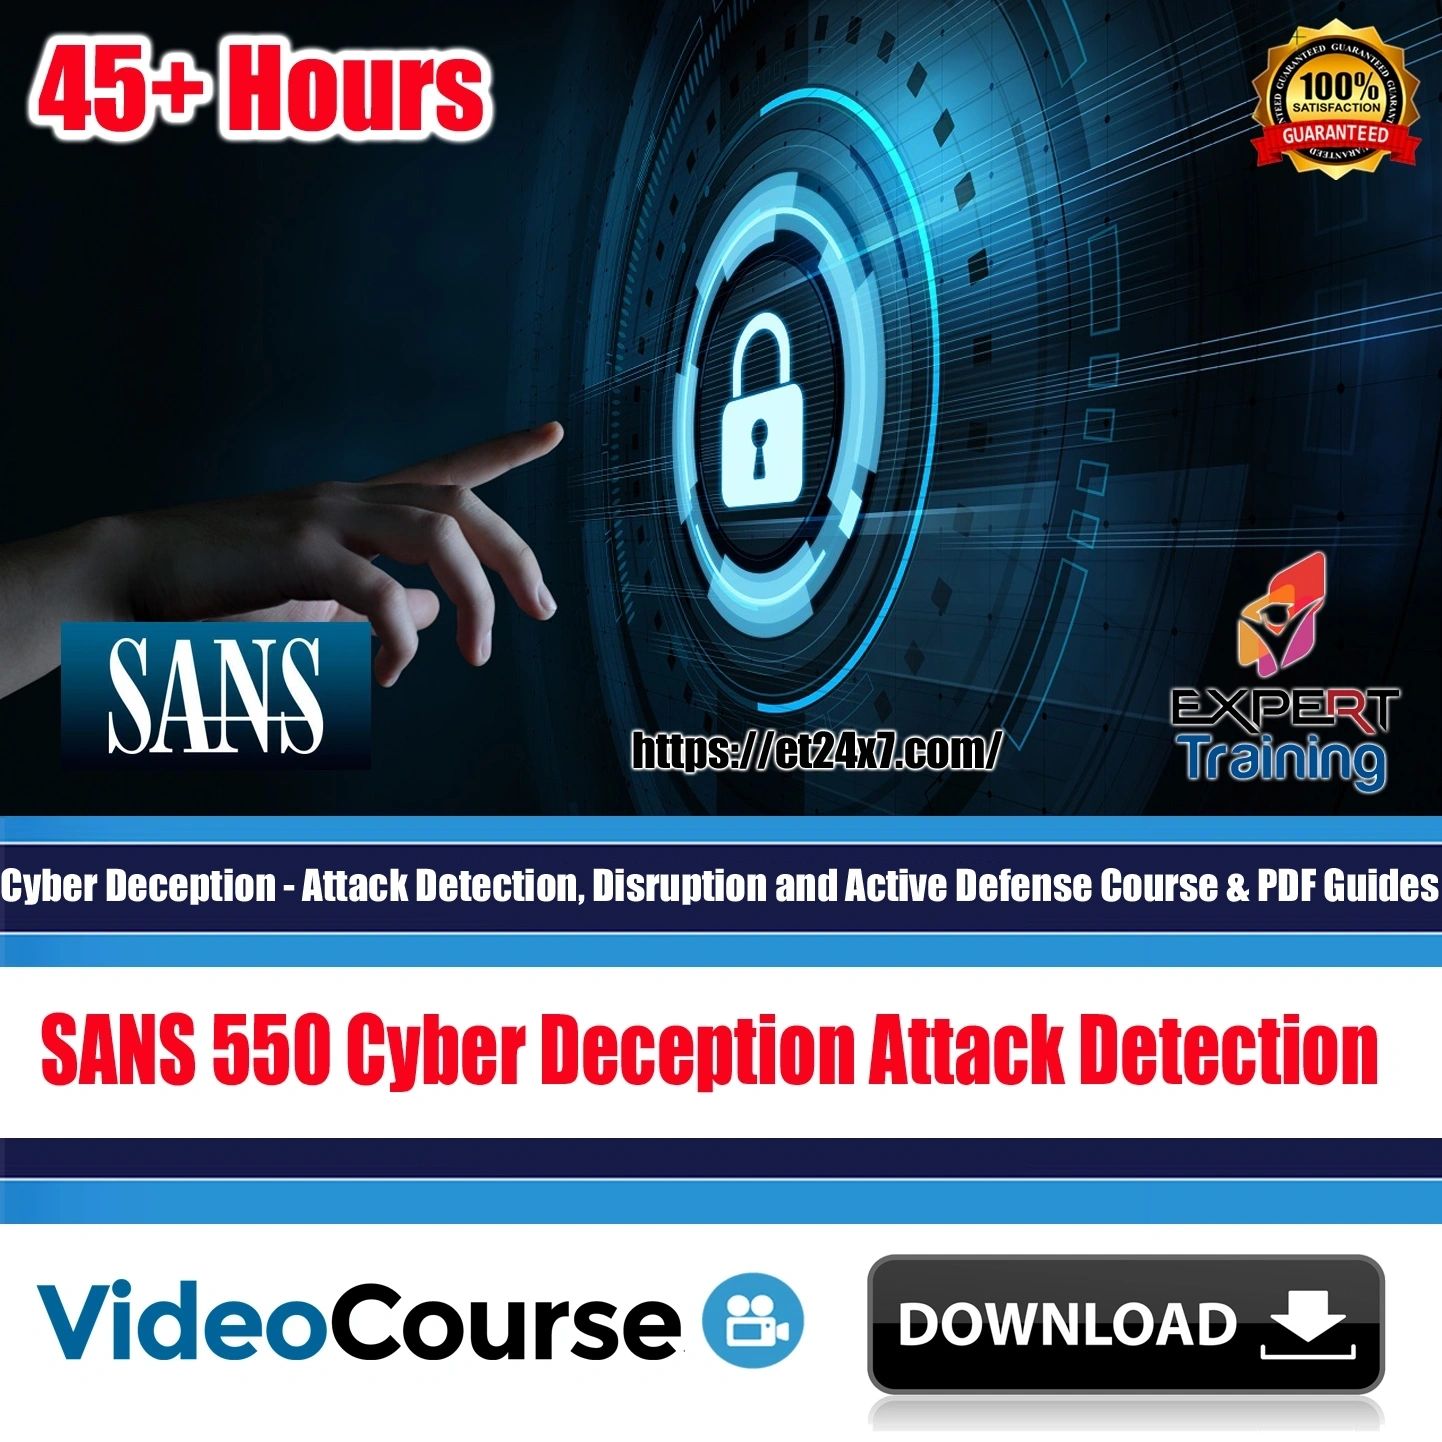 Cyber Deception – Attack Detection, Disruption and Active Defense Course & PDF Guides